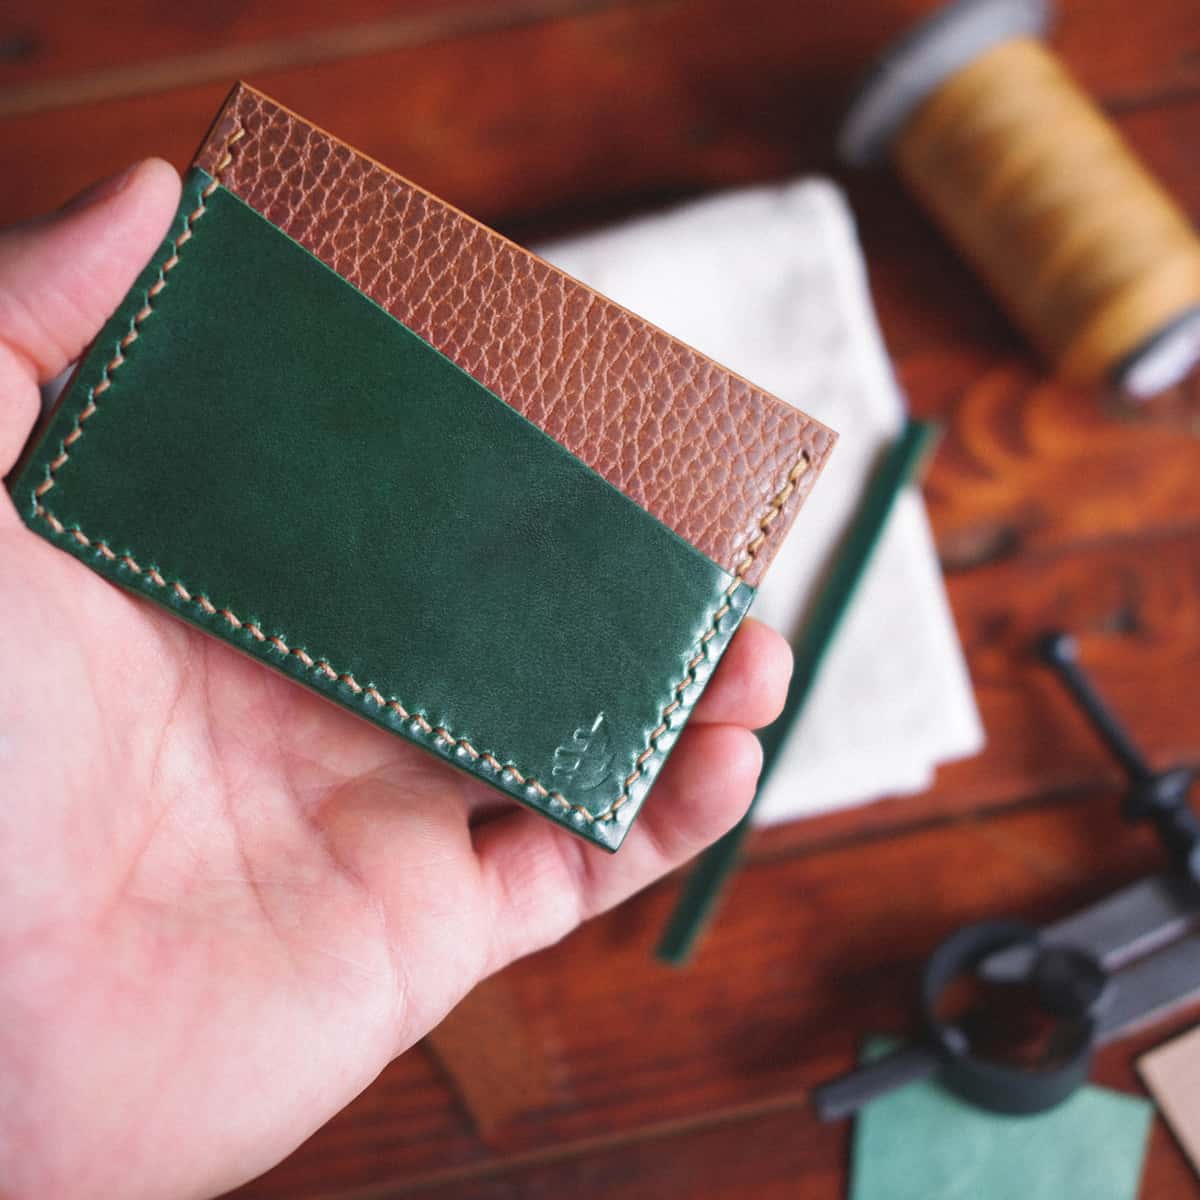 The Scots Card Holder in Emerald Green Gaucho Oil and Brown Dollaro vegetable tanned leather held in hand